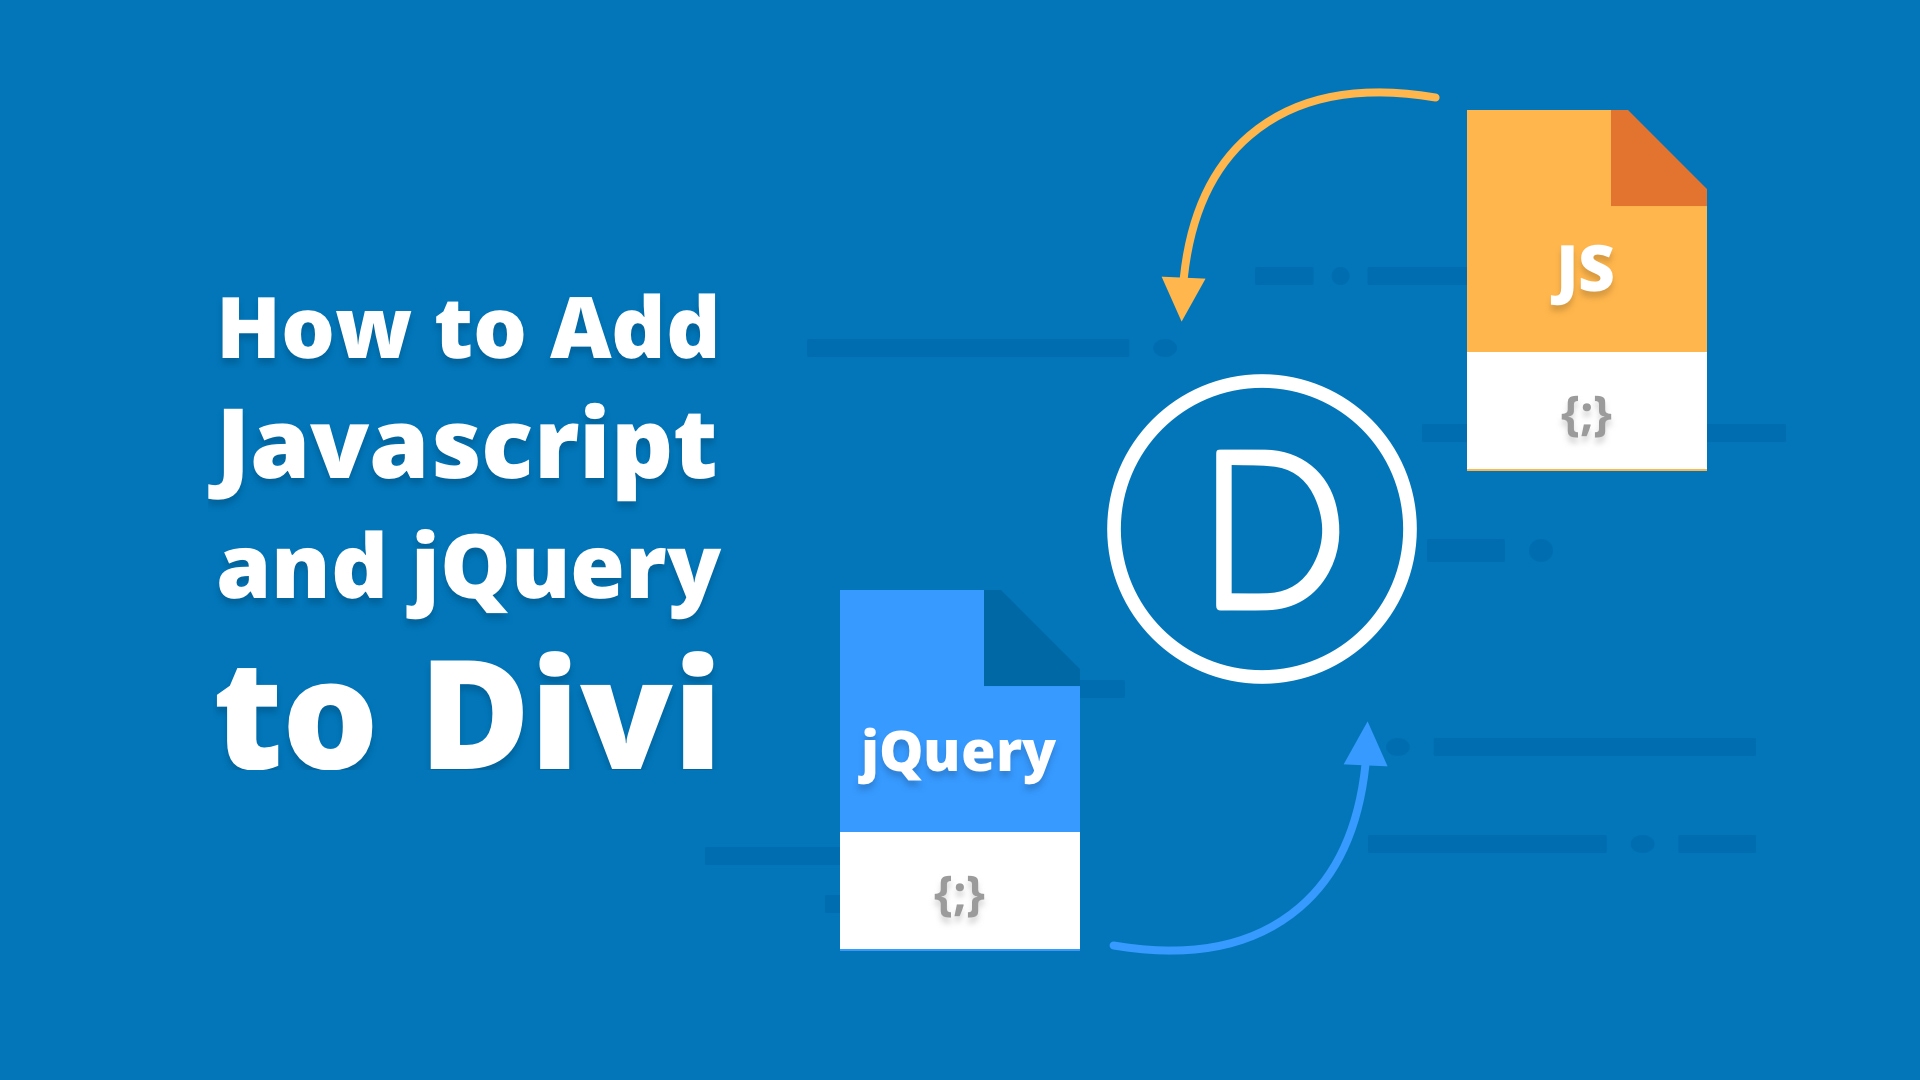 Js JQUERY. Append js. How to add in js.